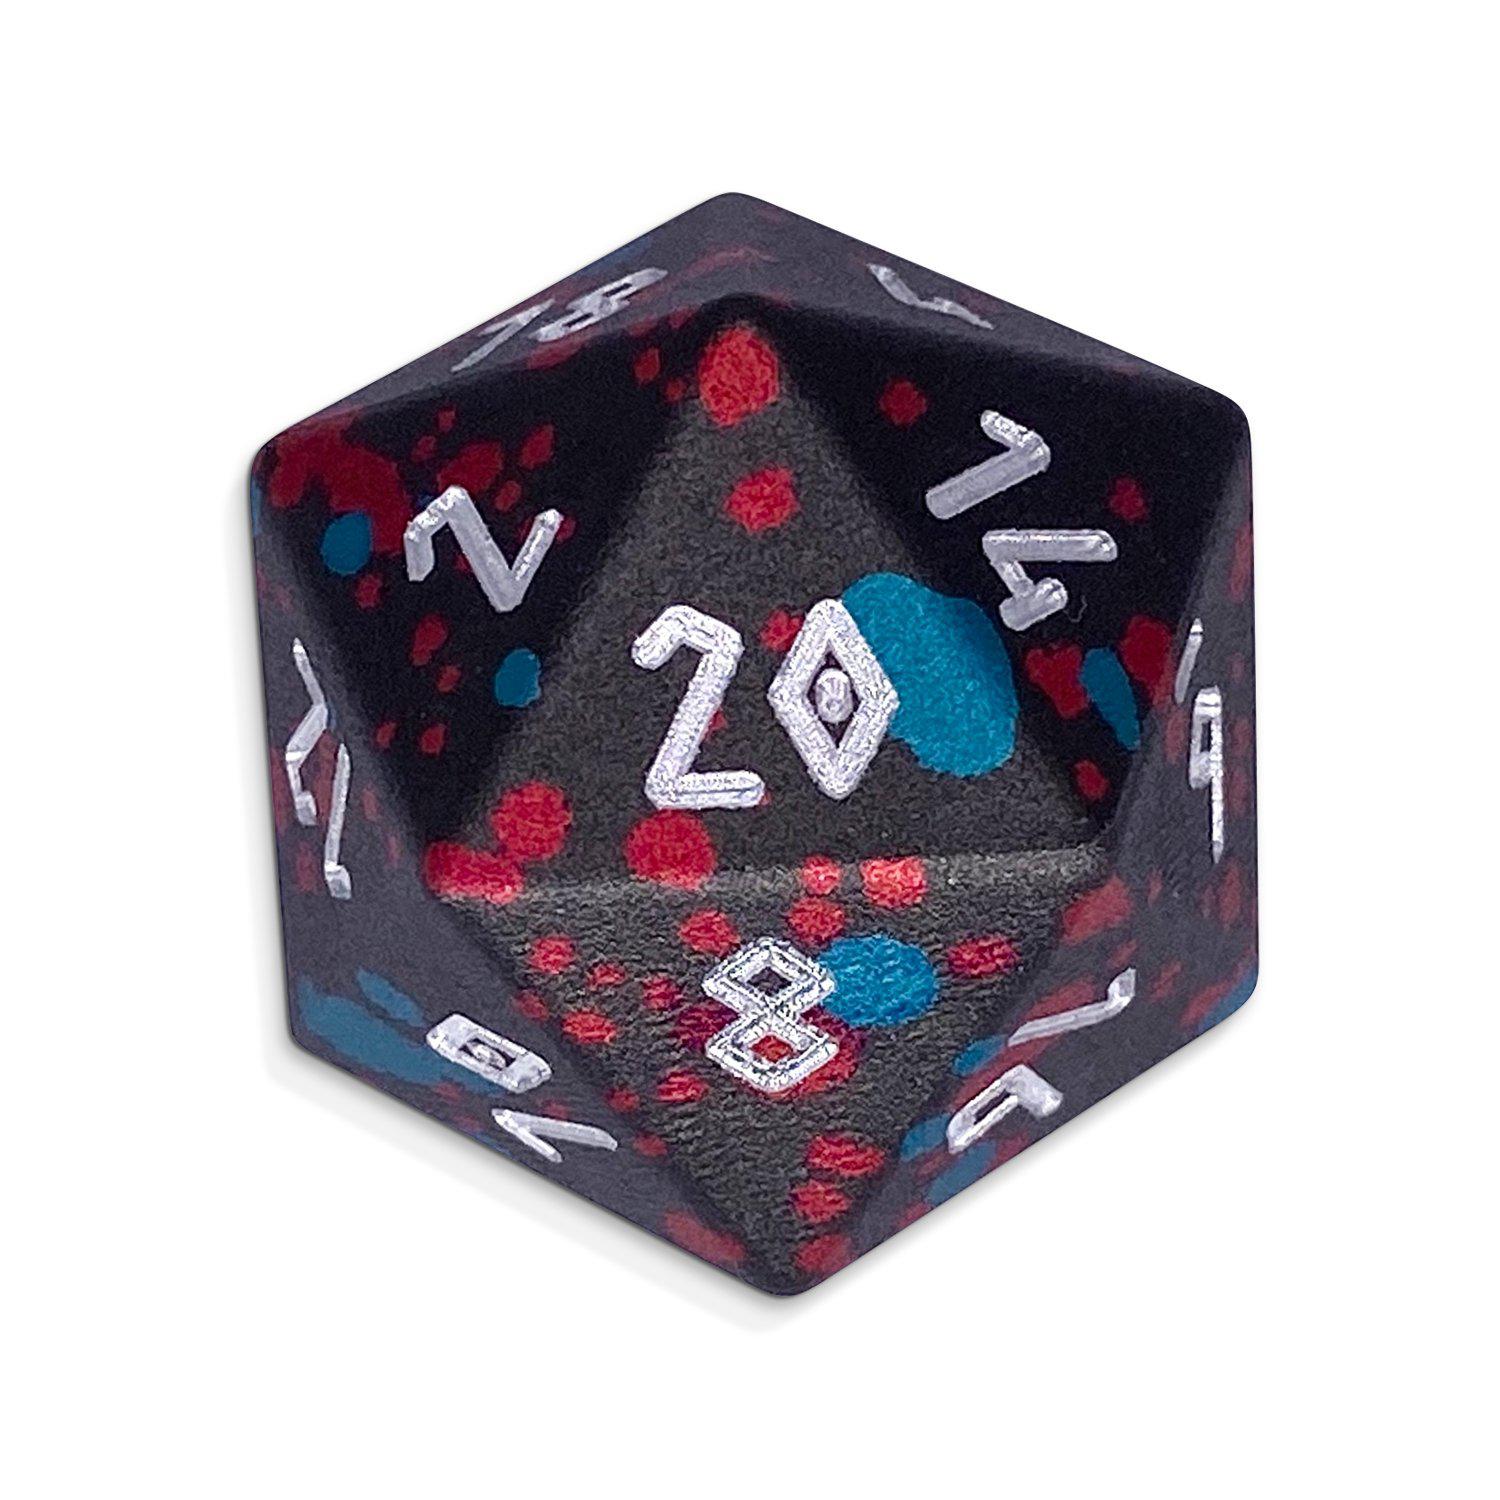 Single Wondrous Dice® D20 in Giant Slayer by Norse Foundry 6063 Aircraft Grade Aluminum - NOR 02405